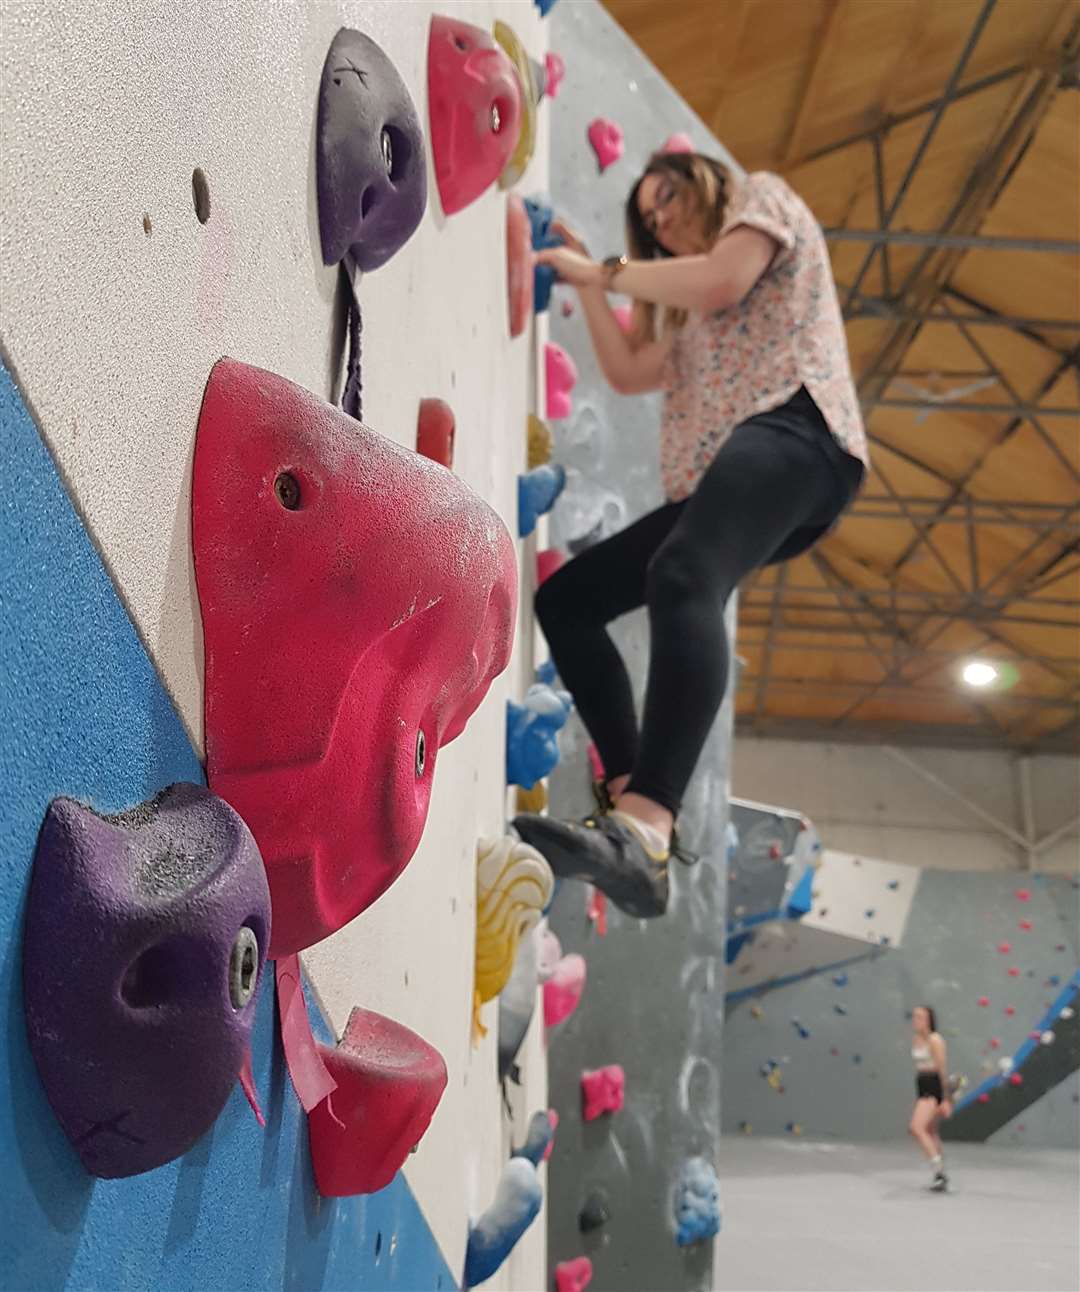 Reporter Liane Castle went to The Climbing Experience